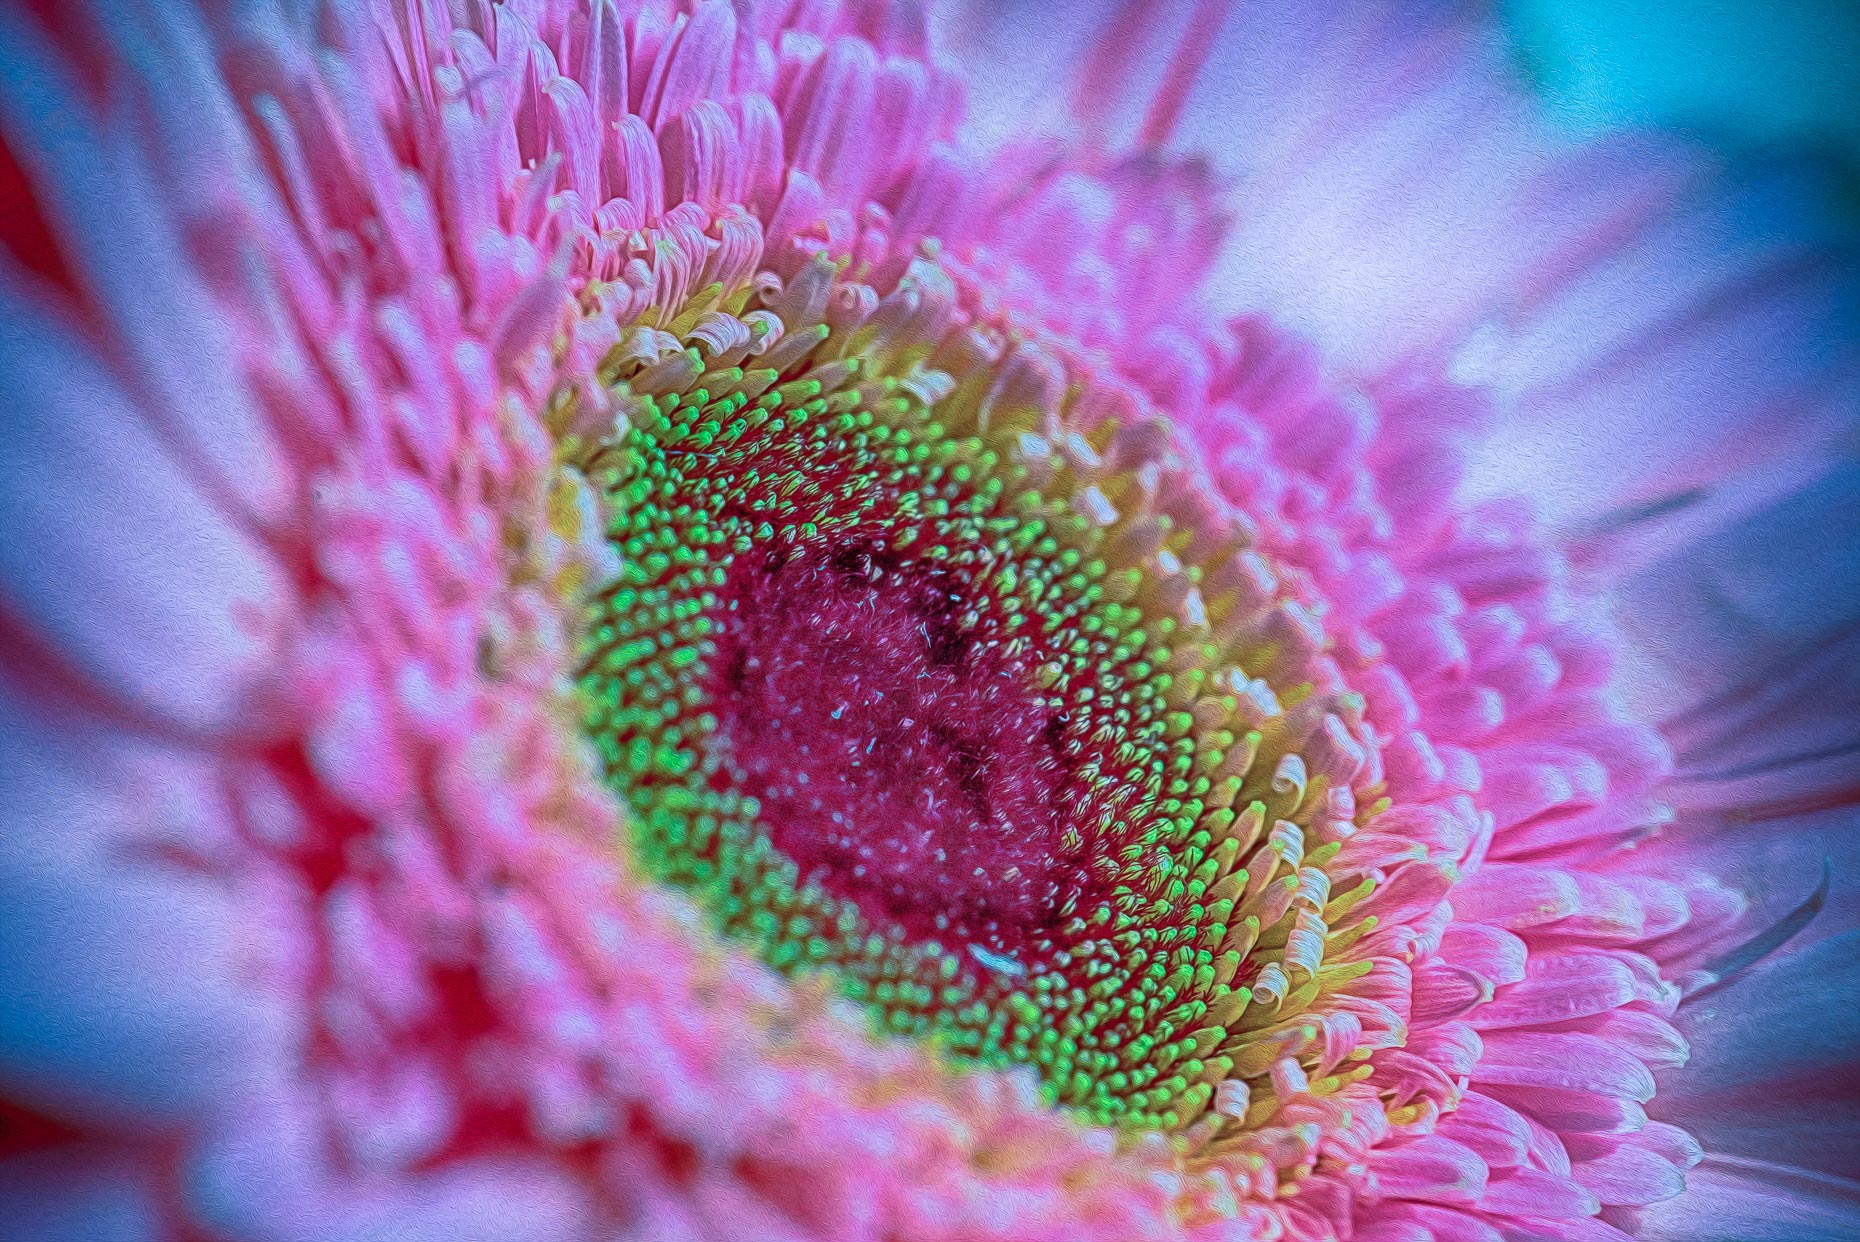 Lush Psychedelic Pink Gerber Daisy Flower #1